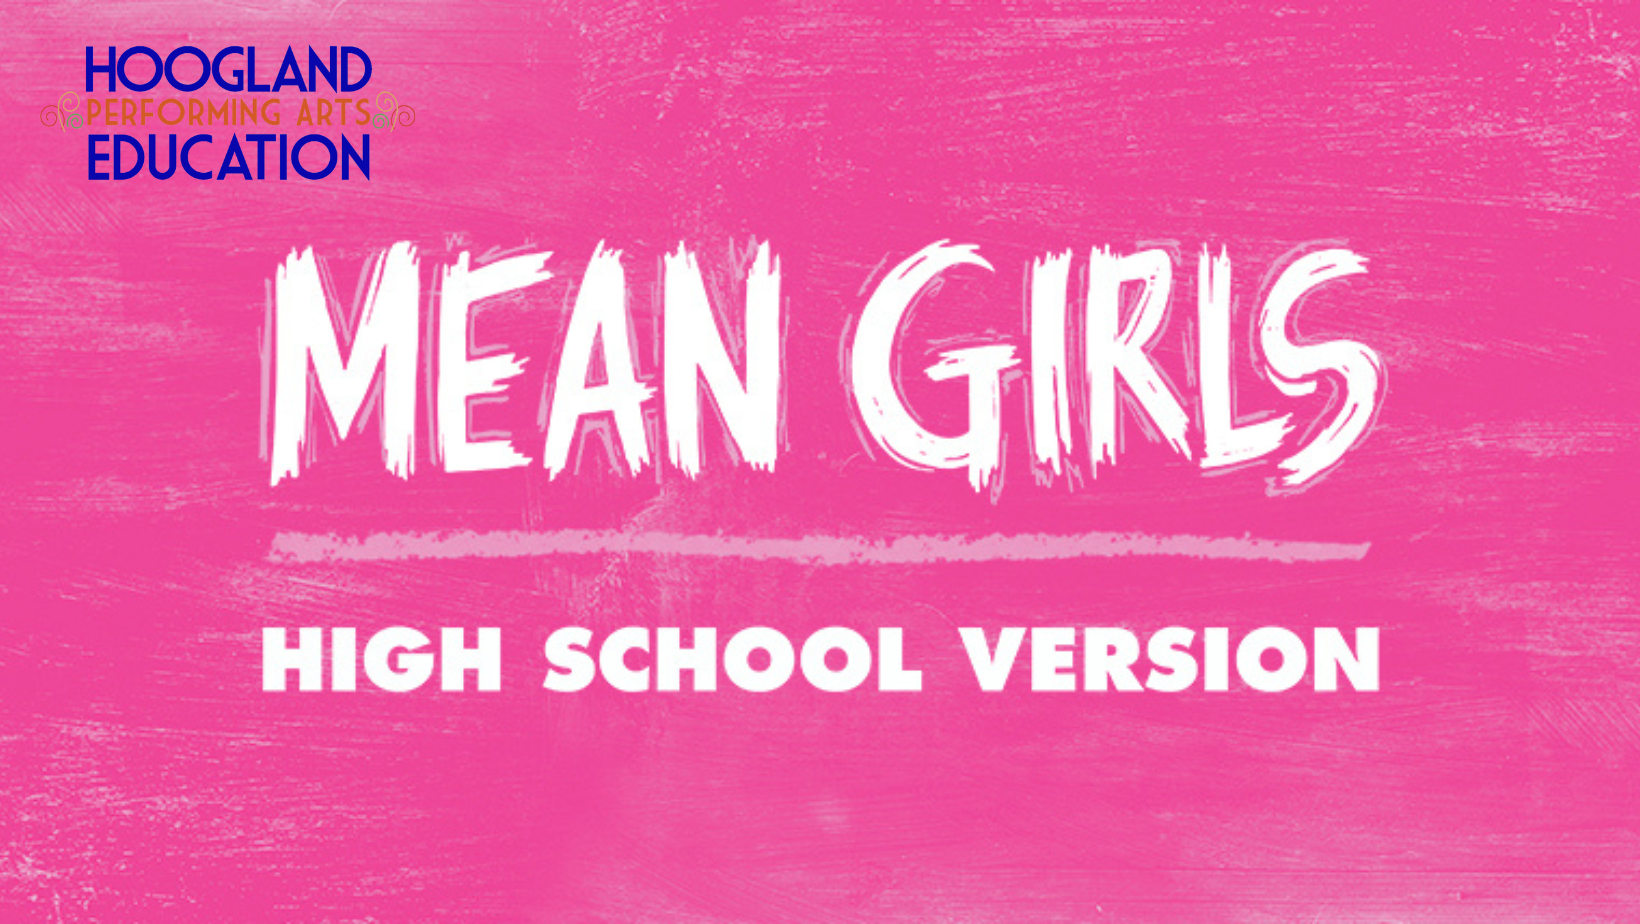 Making It Through High School with Mean Girls - Denver Center for